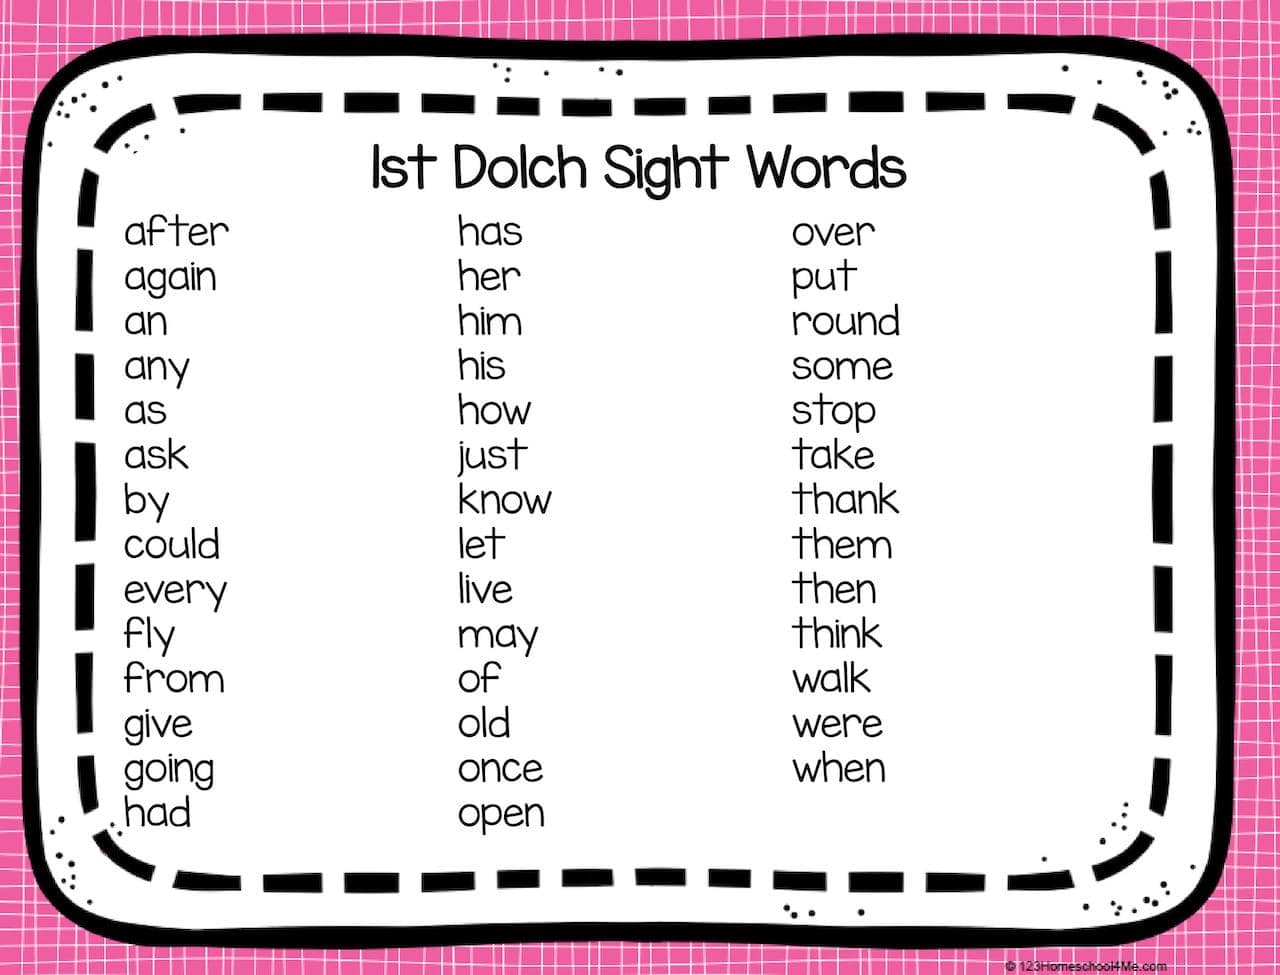 Dolch 1st – All words